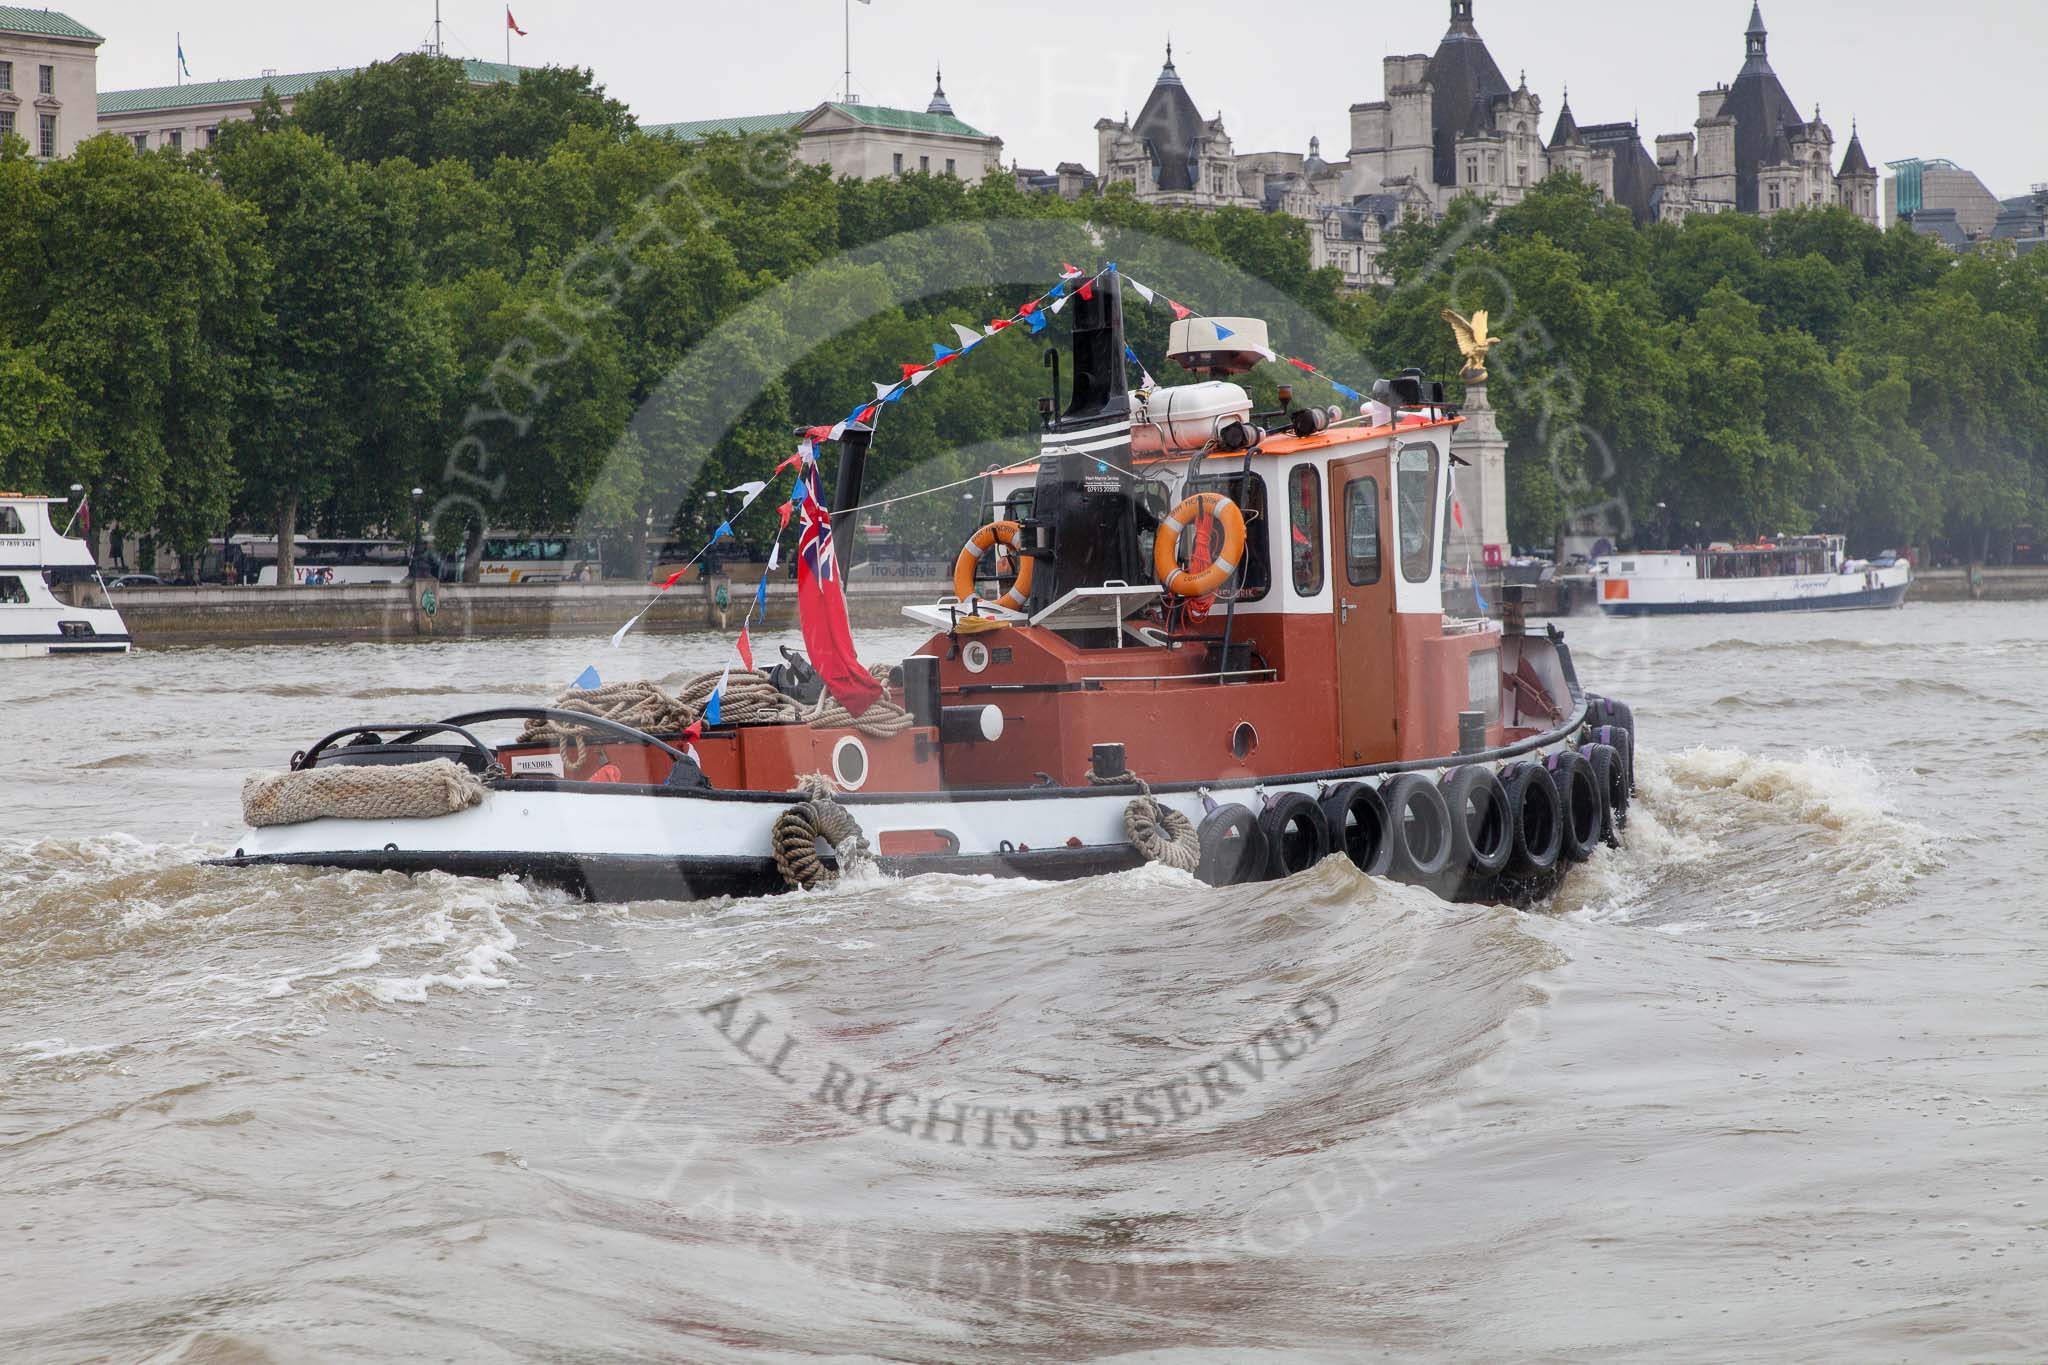 TOW River Thames Barge Driving Race 2014.
River Thames between Greenwich and Westminster,
London,

United Kingdom,
on 28 June 2014 at 14:41, image #442